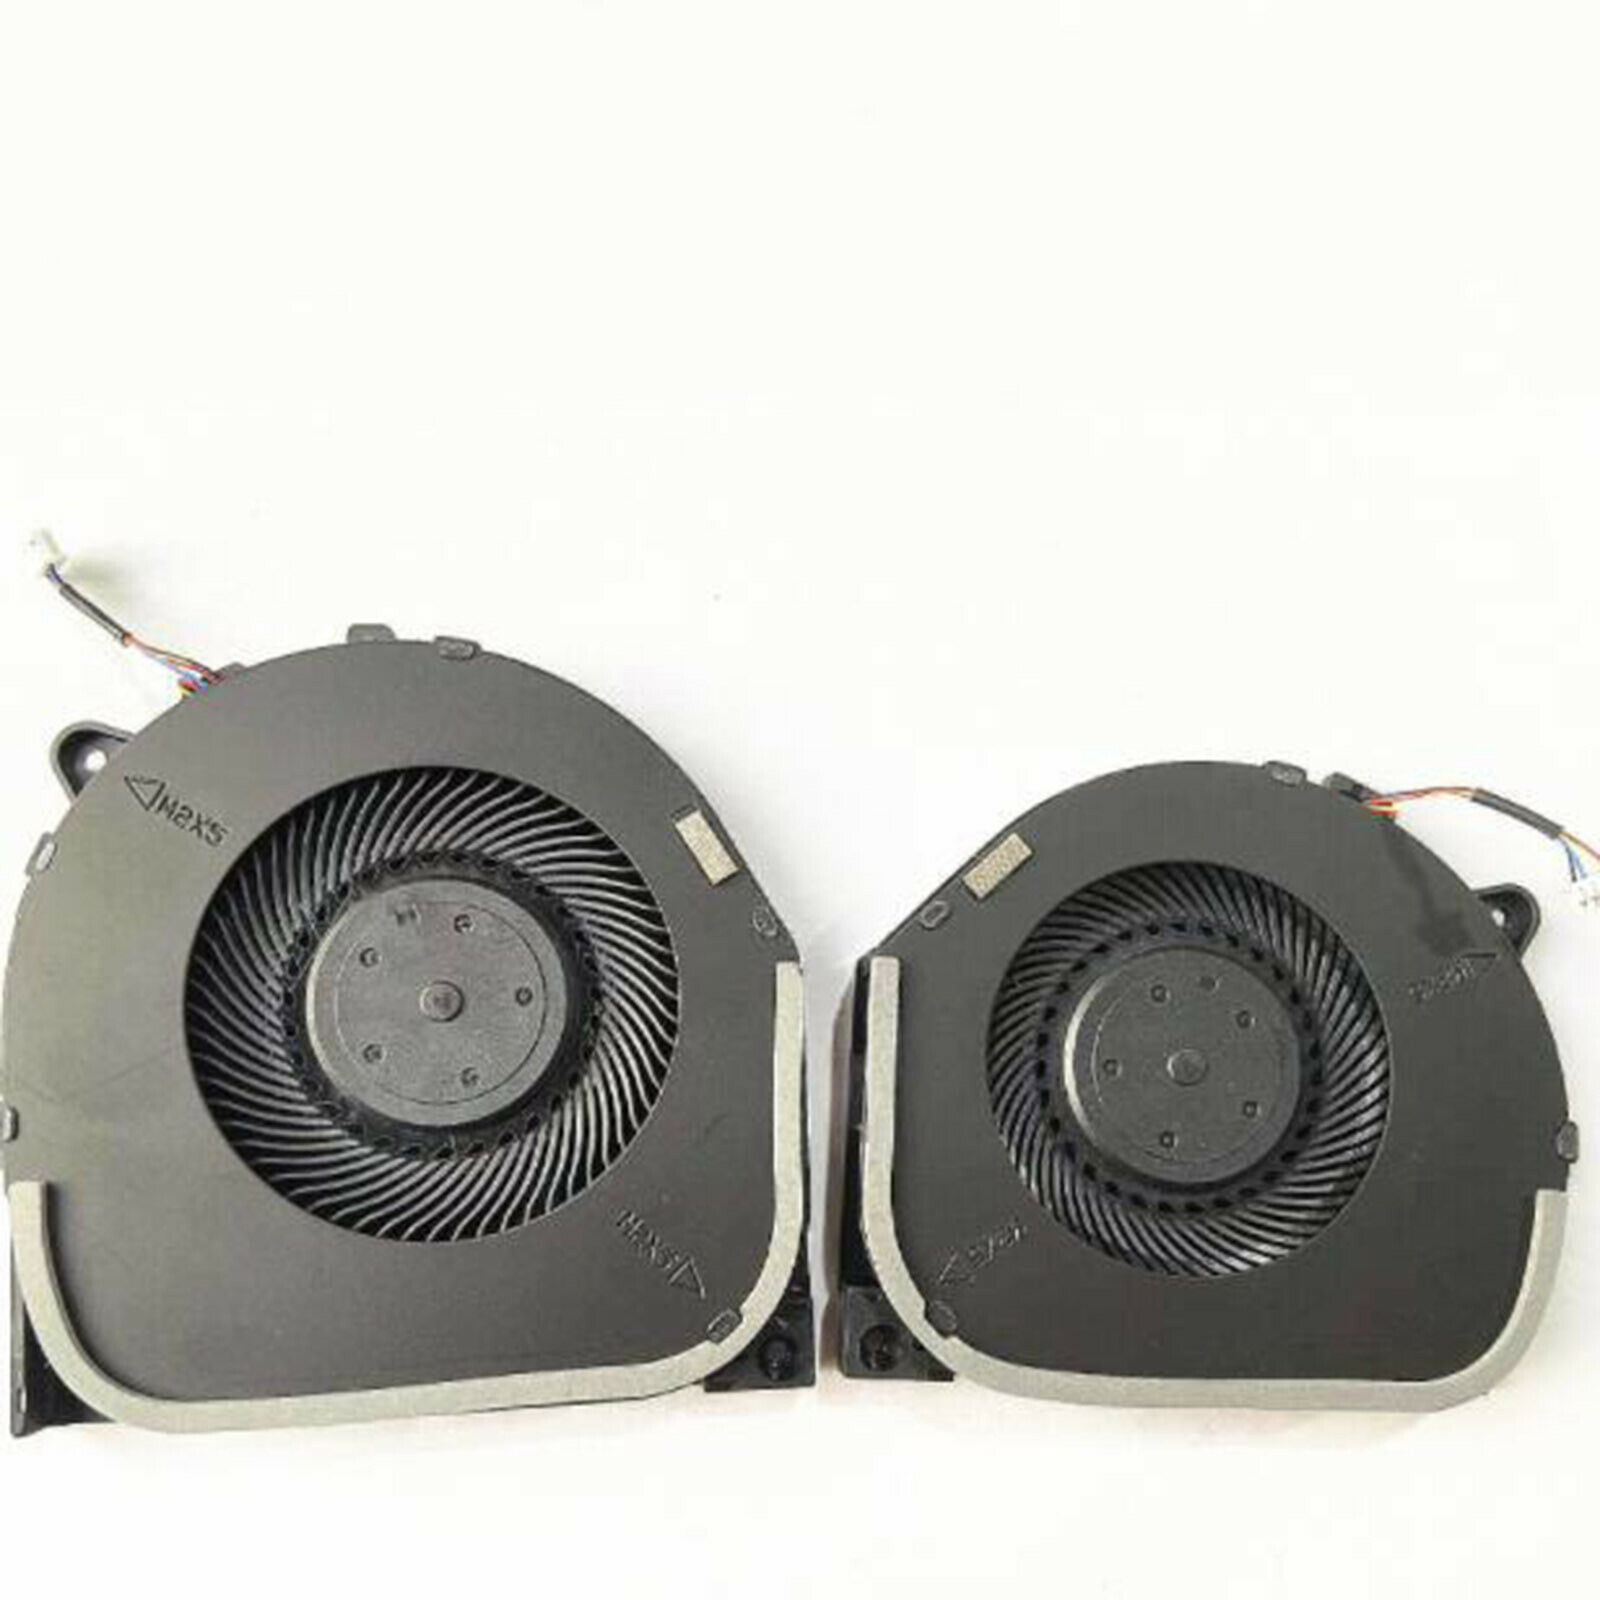 New CPU+GPU Cooling Fan For Lenovo Legion Y7000 Y530 Laptop Dual Cooler Fans Set CPU & GPU Cooling - Click Image to Close